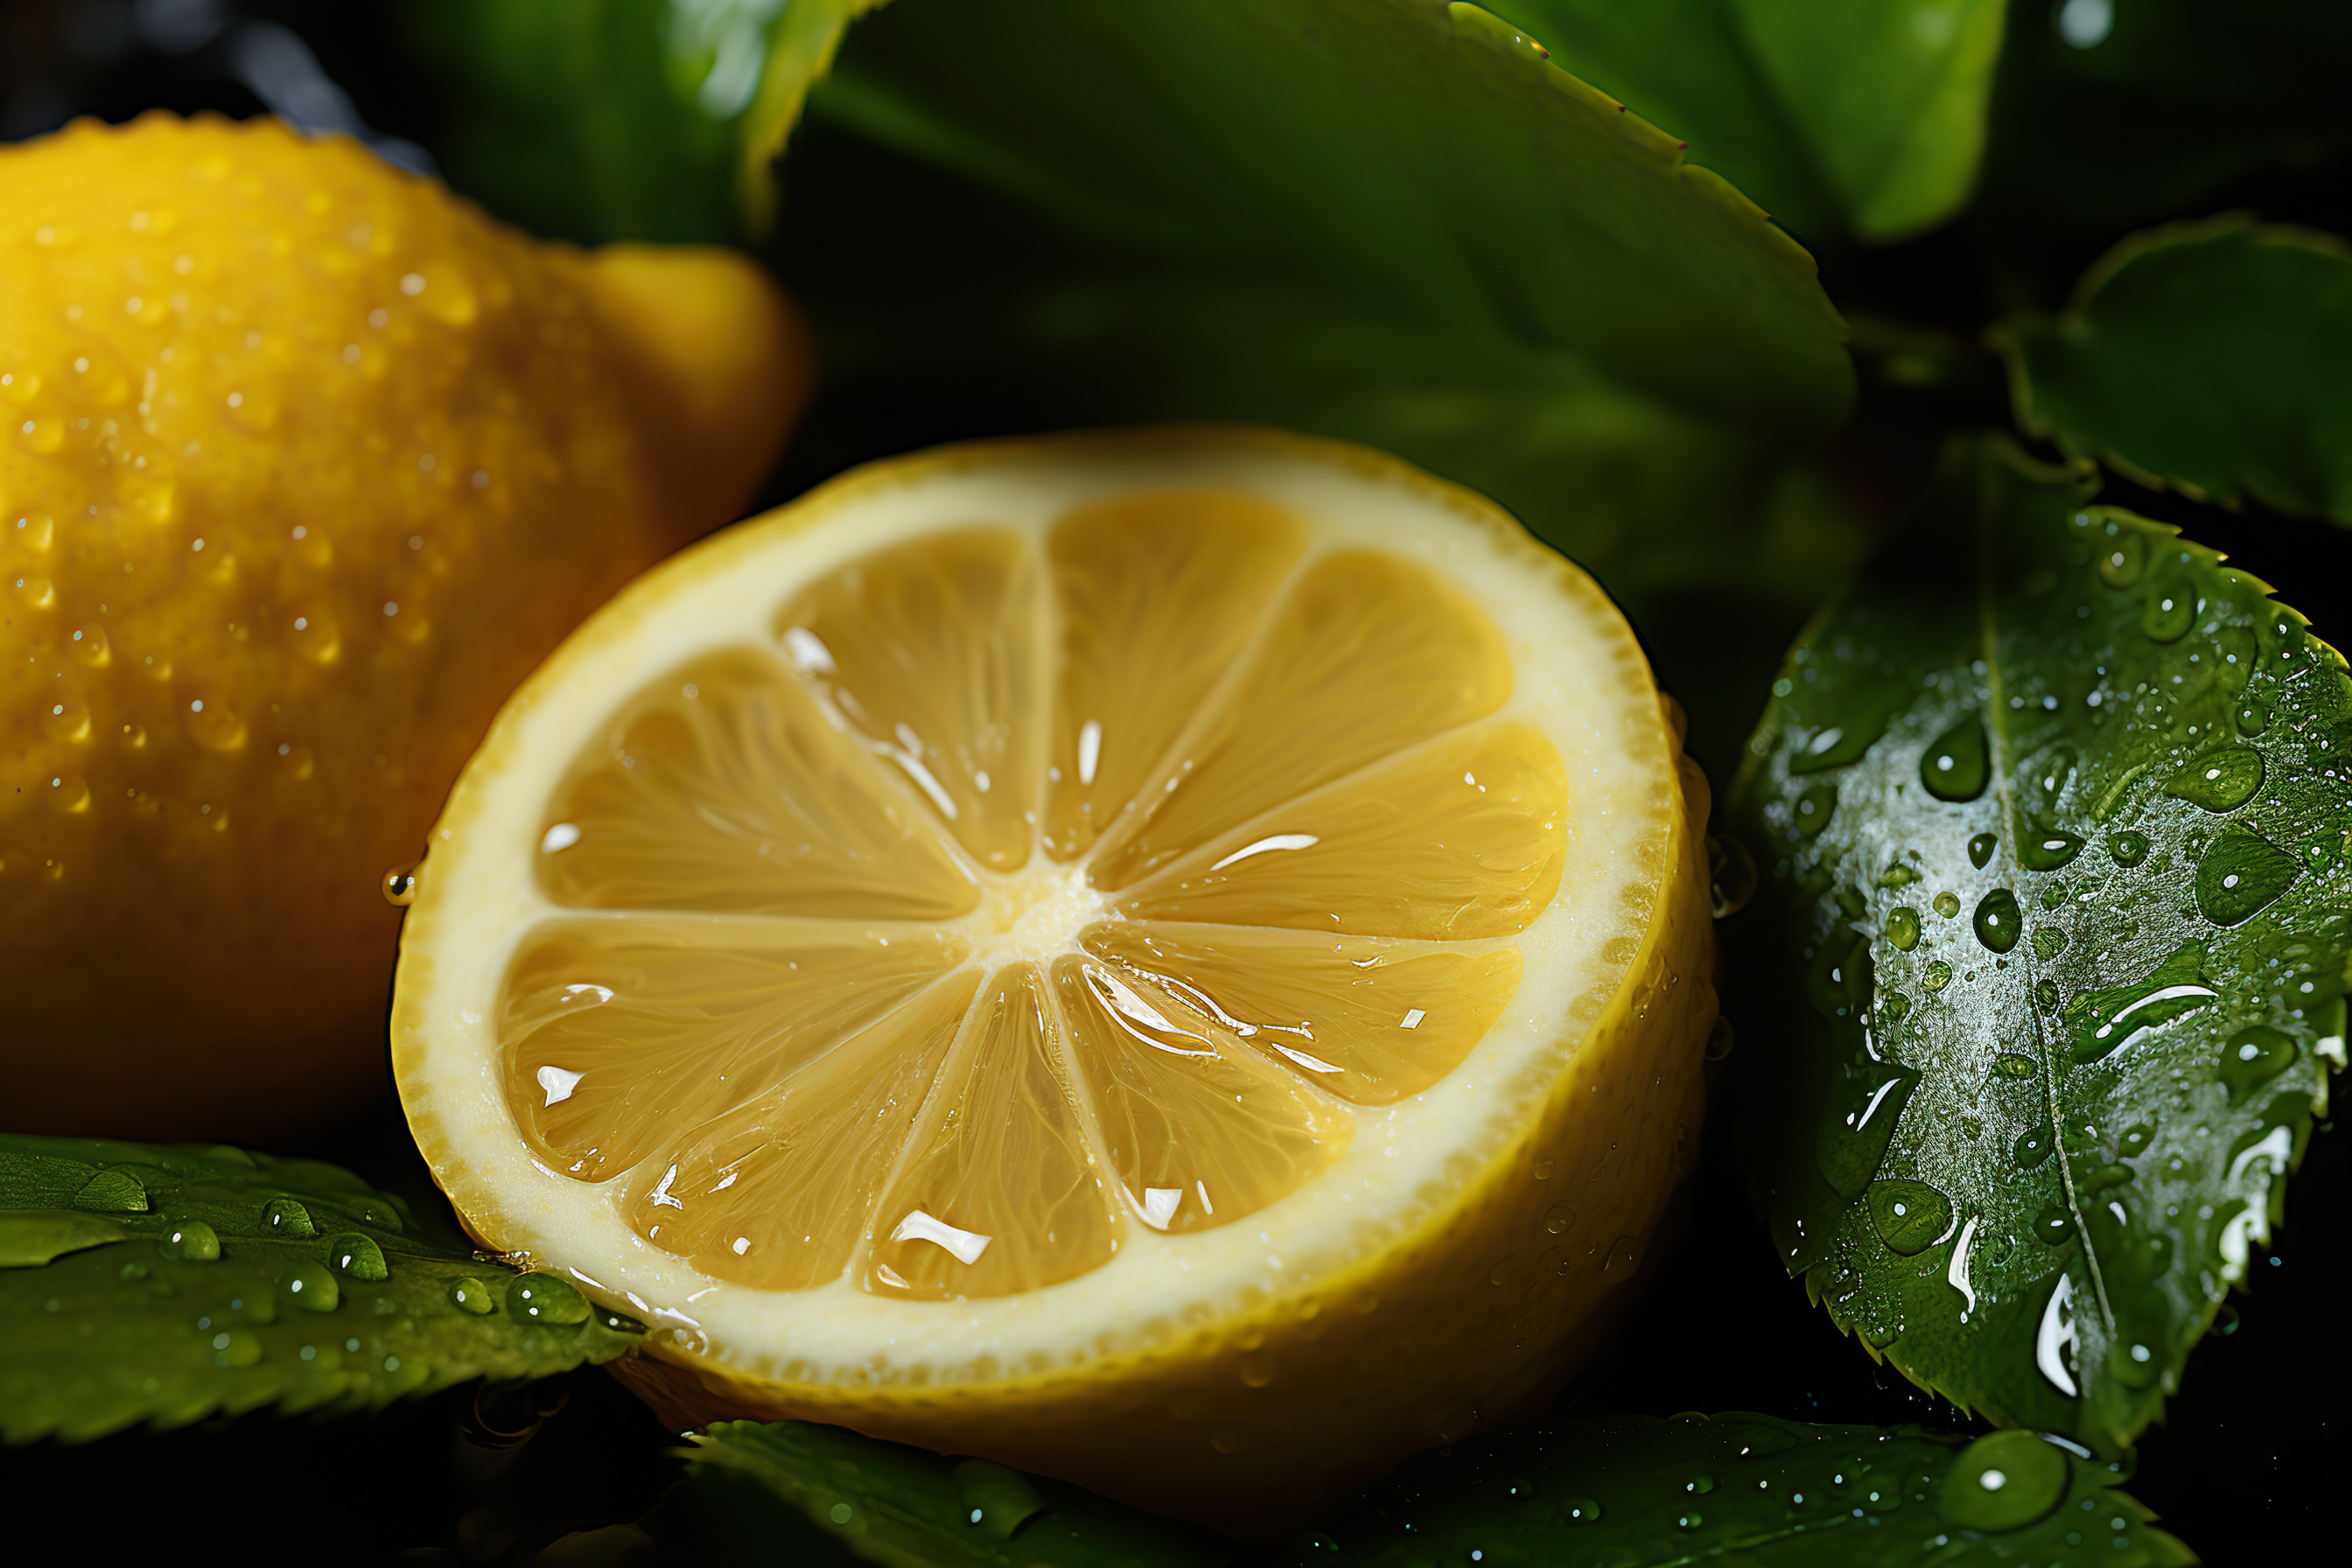 Close-up shot of sliced lemon with green leaves and water droplets on dark background